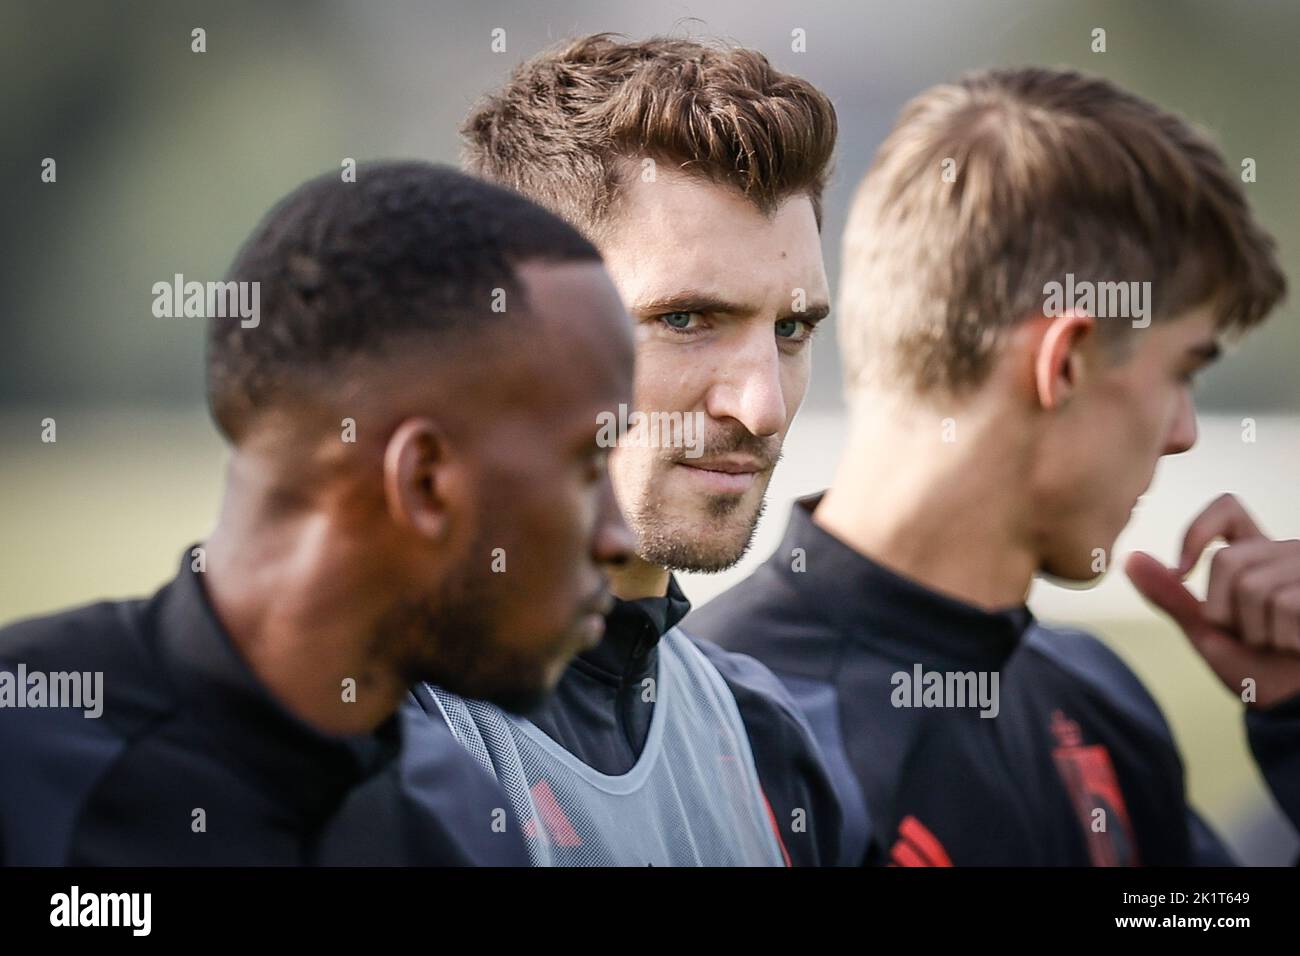 Tubize, Belgium, 20/09/2022, Belgium's Thomas Meunier pictured during a training session of the Belgian national soccer team the Red Devils, Tuesday 20 September 2022, in Tubize, in preparation of the Nations League matches against the Netherlands and Wales. BELGA PHOTO BRUNO FAHY Stock Photo